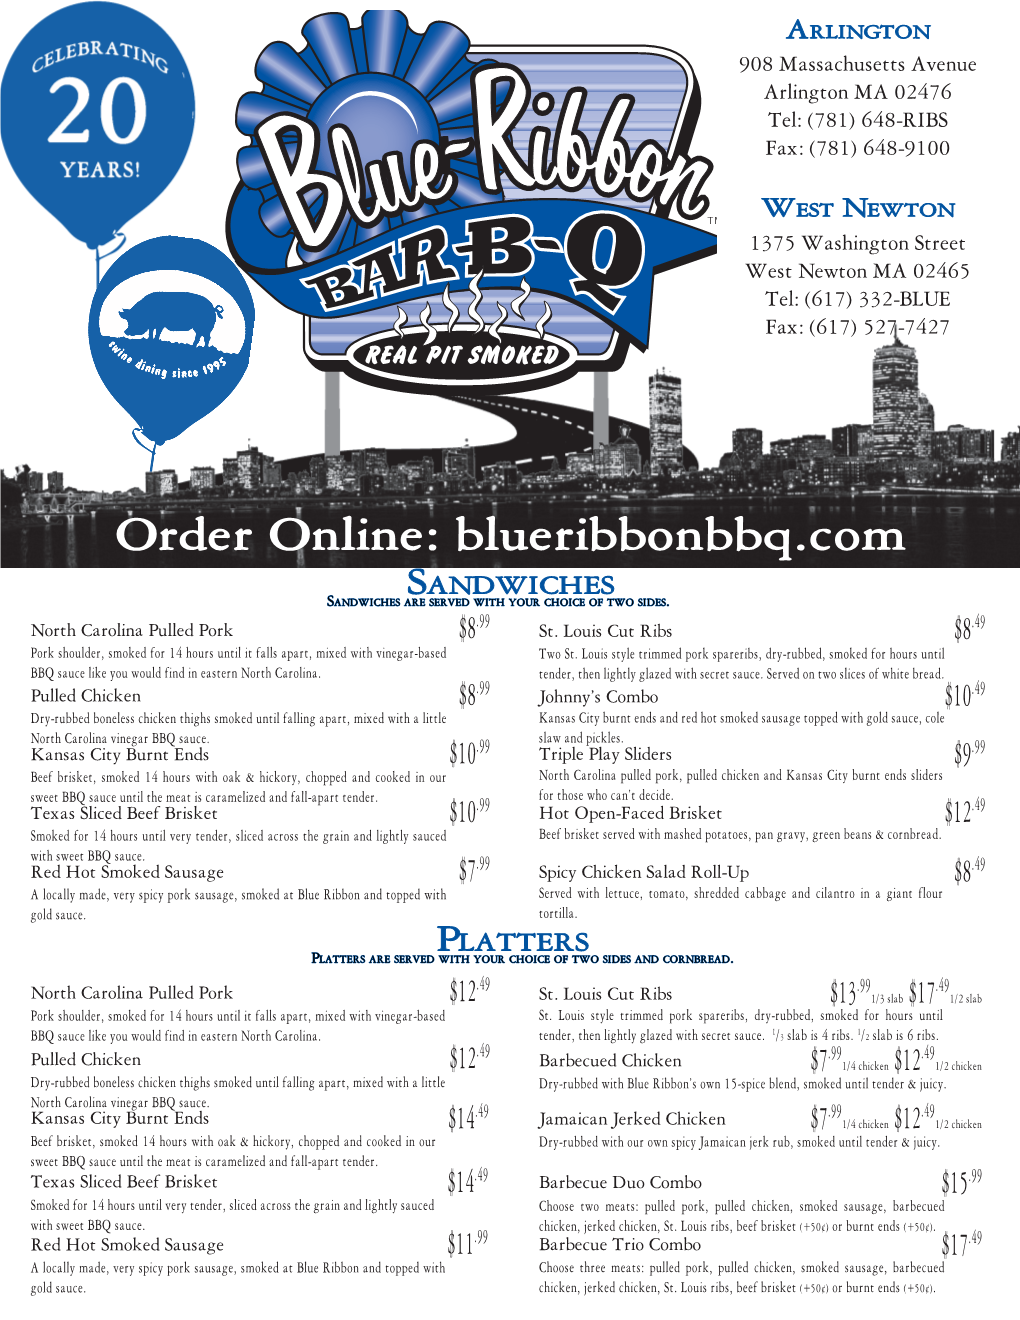 Order Online: Blueribbonbbq.Com Sandwiches Sandwiches Are Served with Your Choice of Two Sides